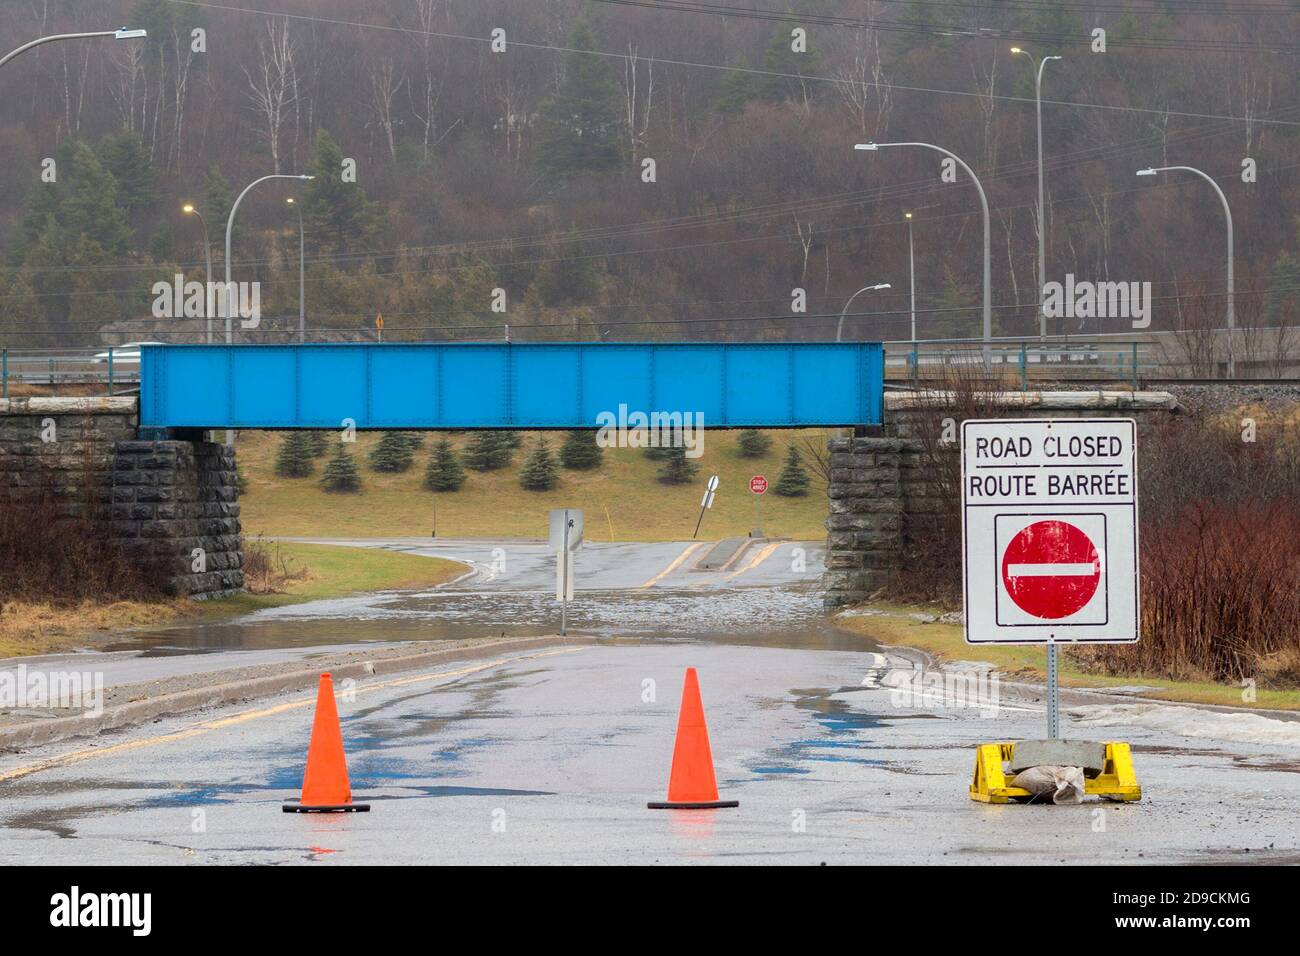 A flooded road under a blue bridge. Orange pylons block the road. A road closed sign sits to the right. Stock Photo